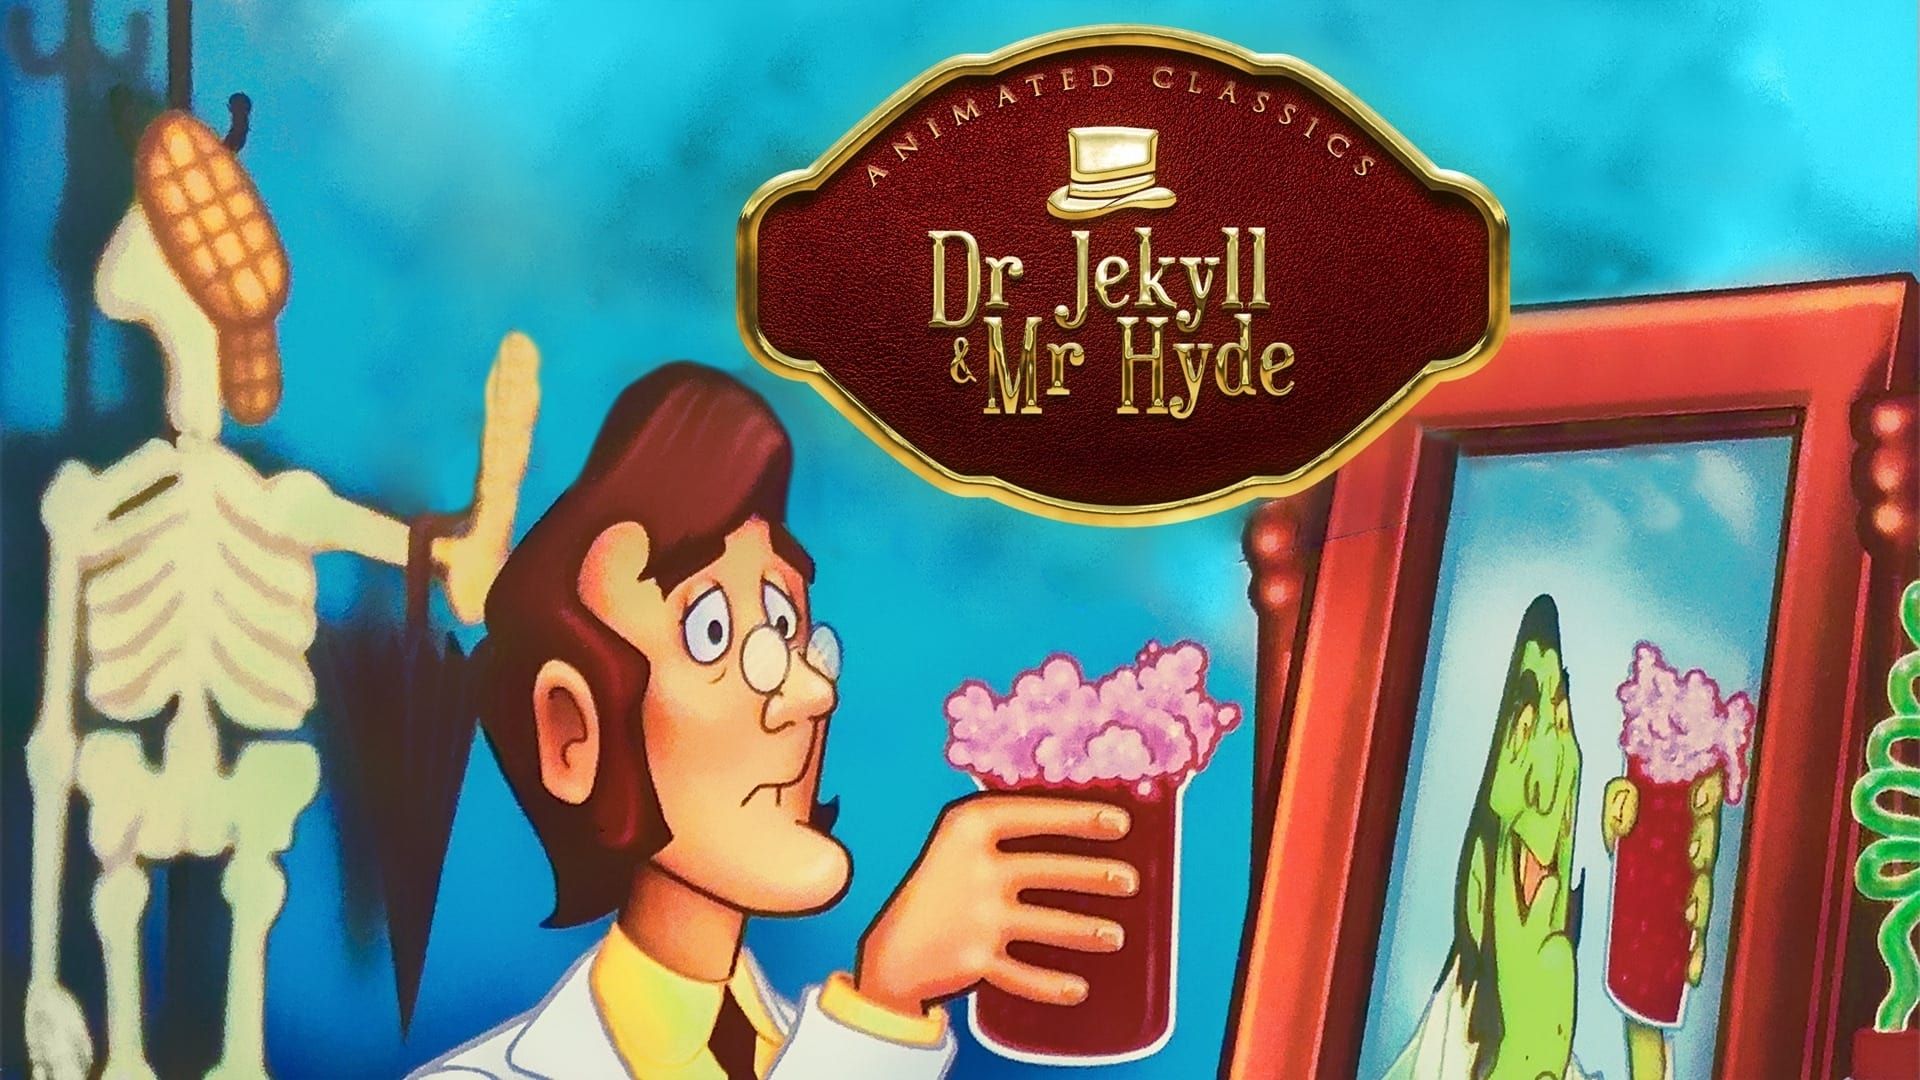 Dr. Jekyll and Mr. Hyde background